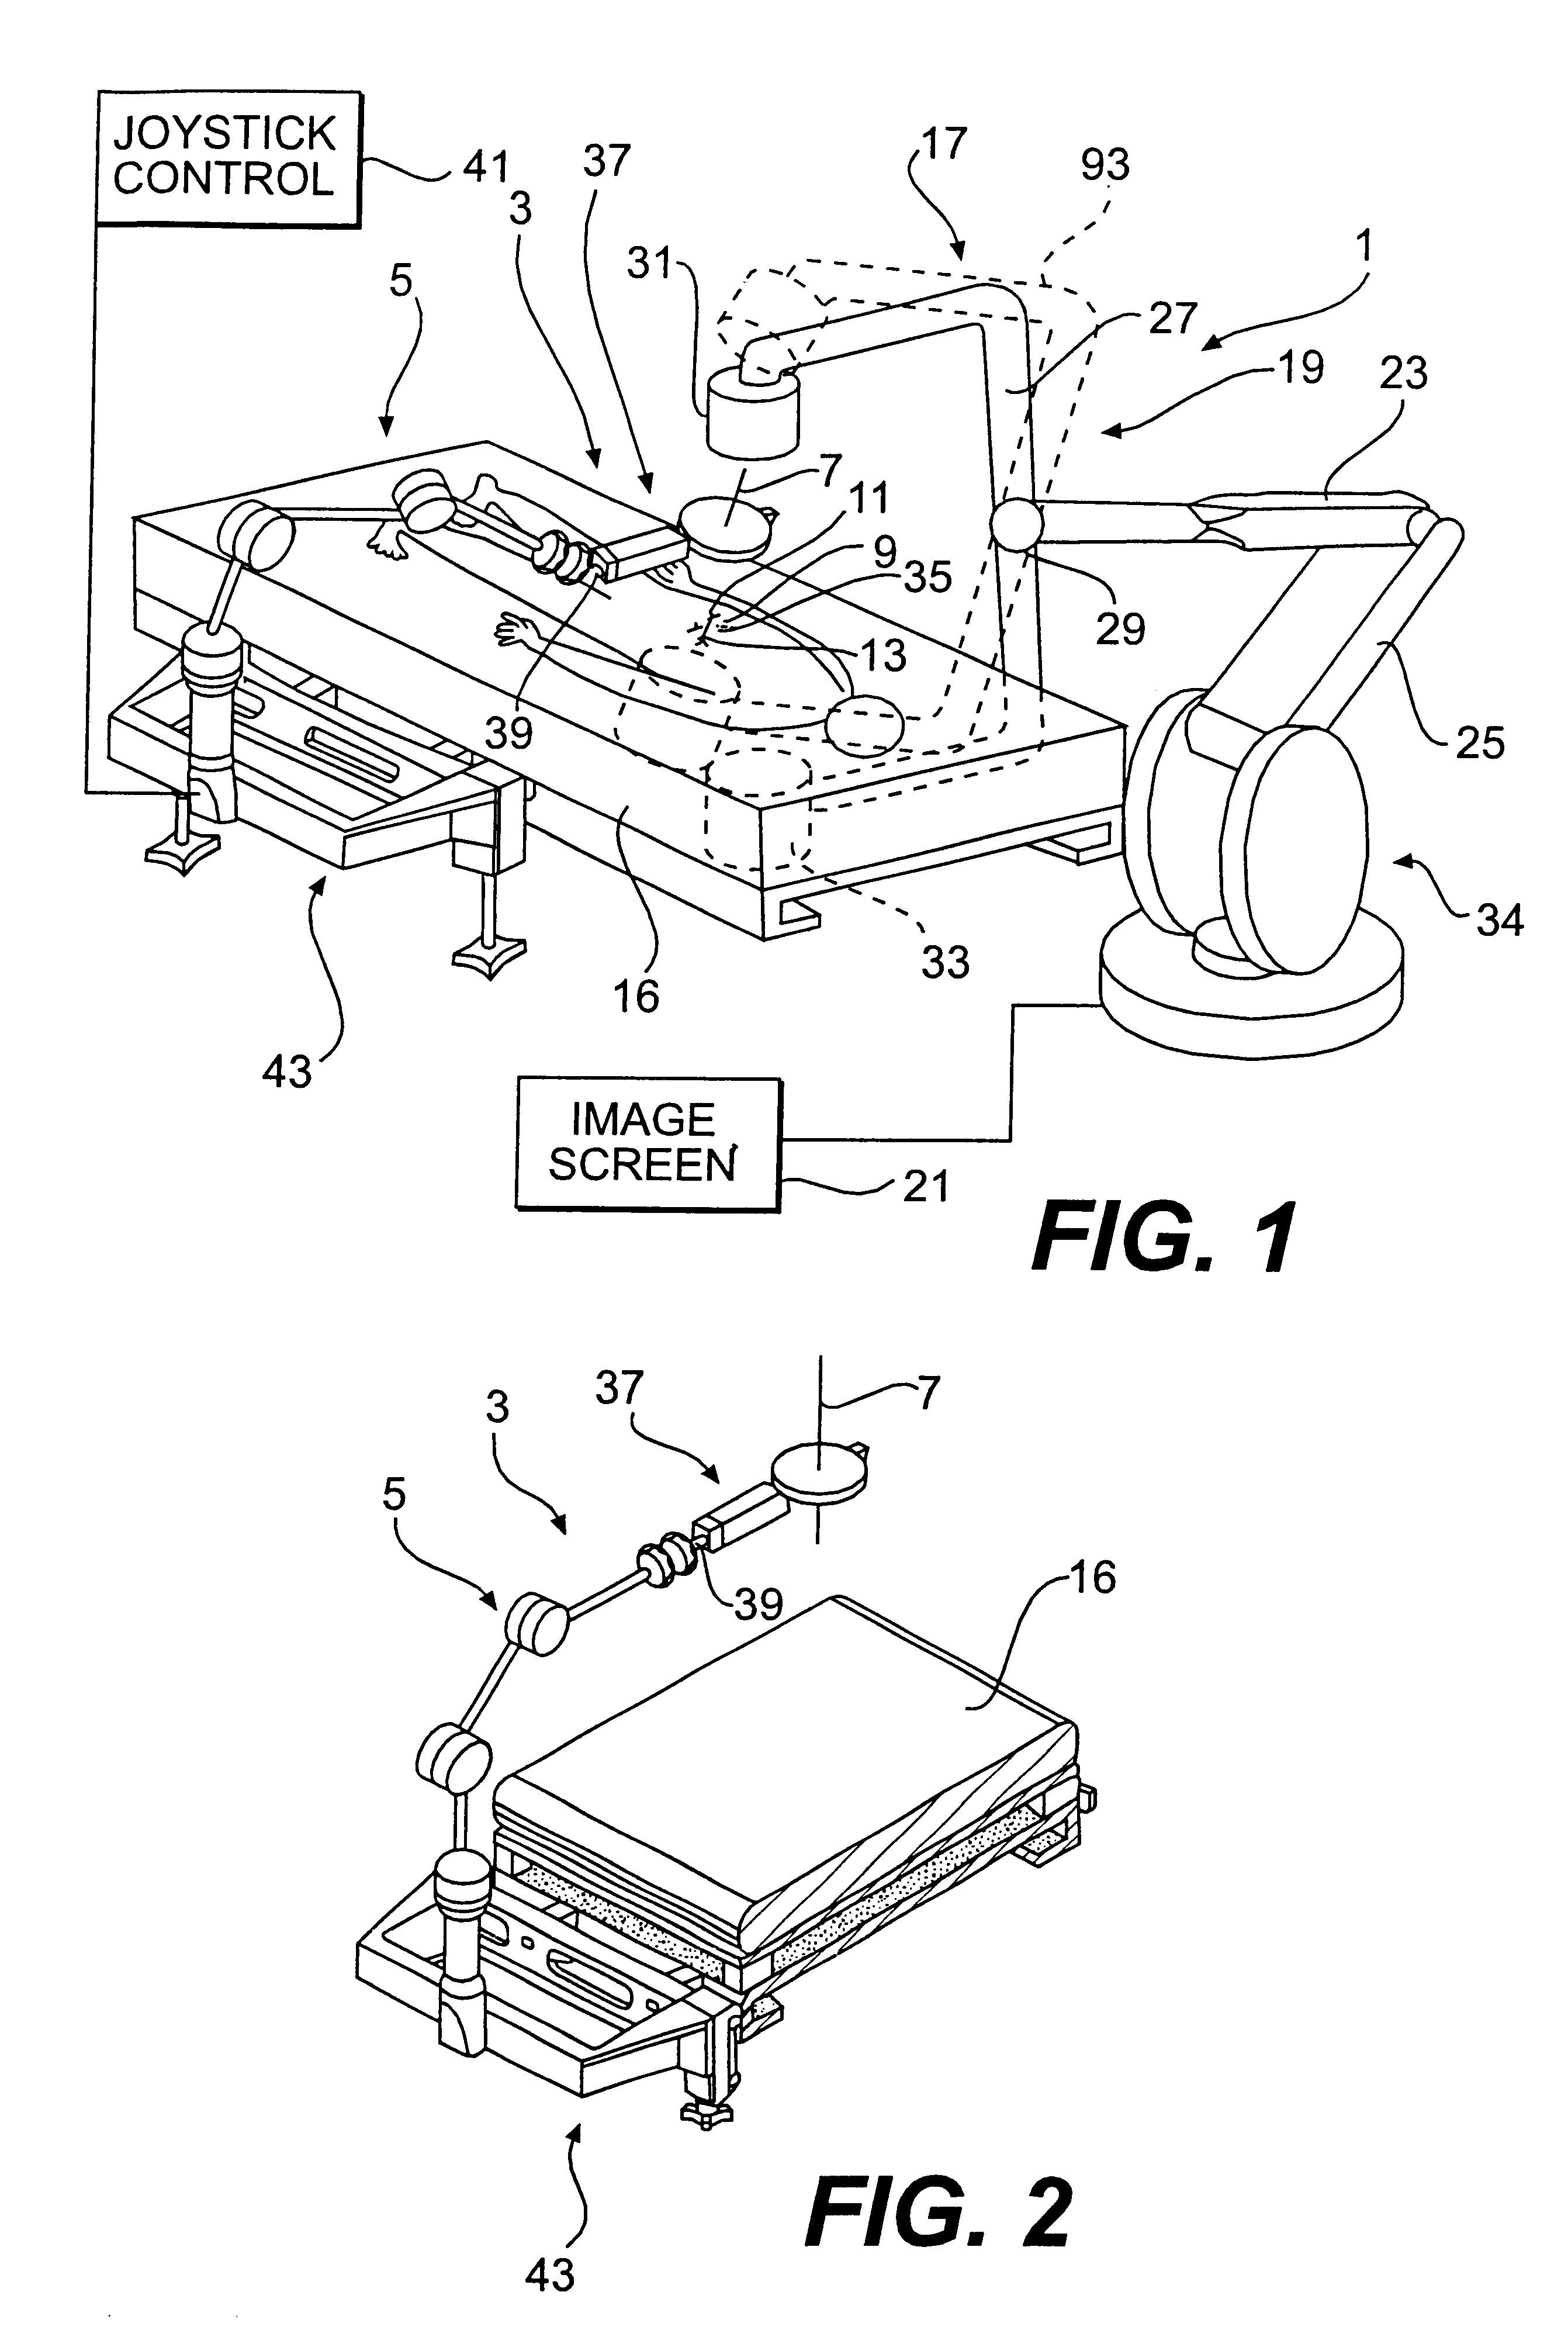 Friction transmission with axial loading and a radiolucent surgical needle driver